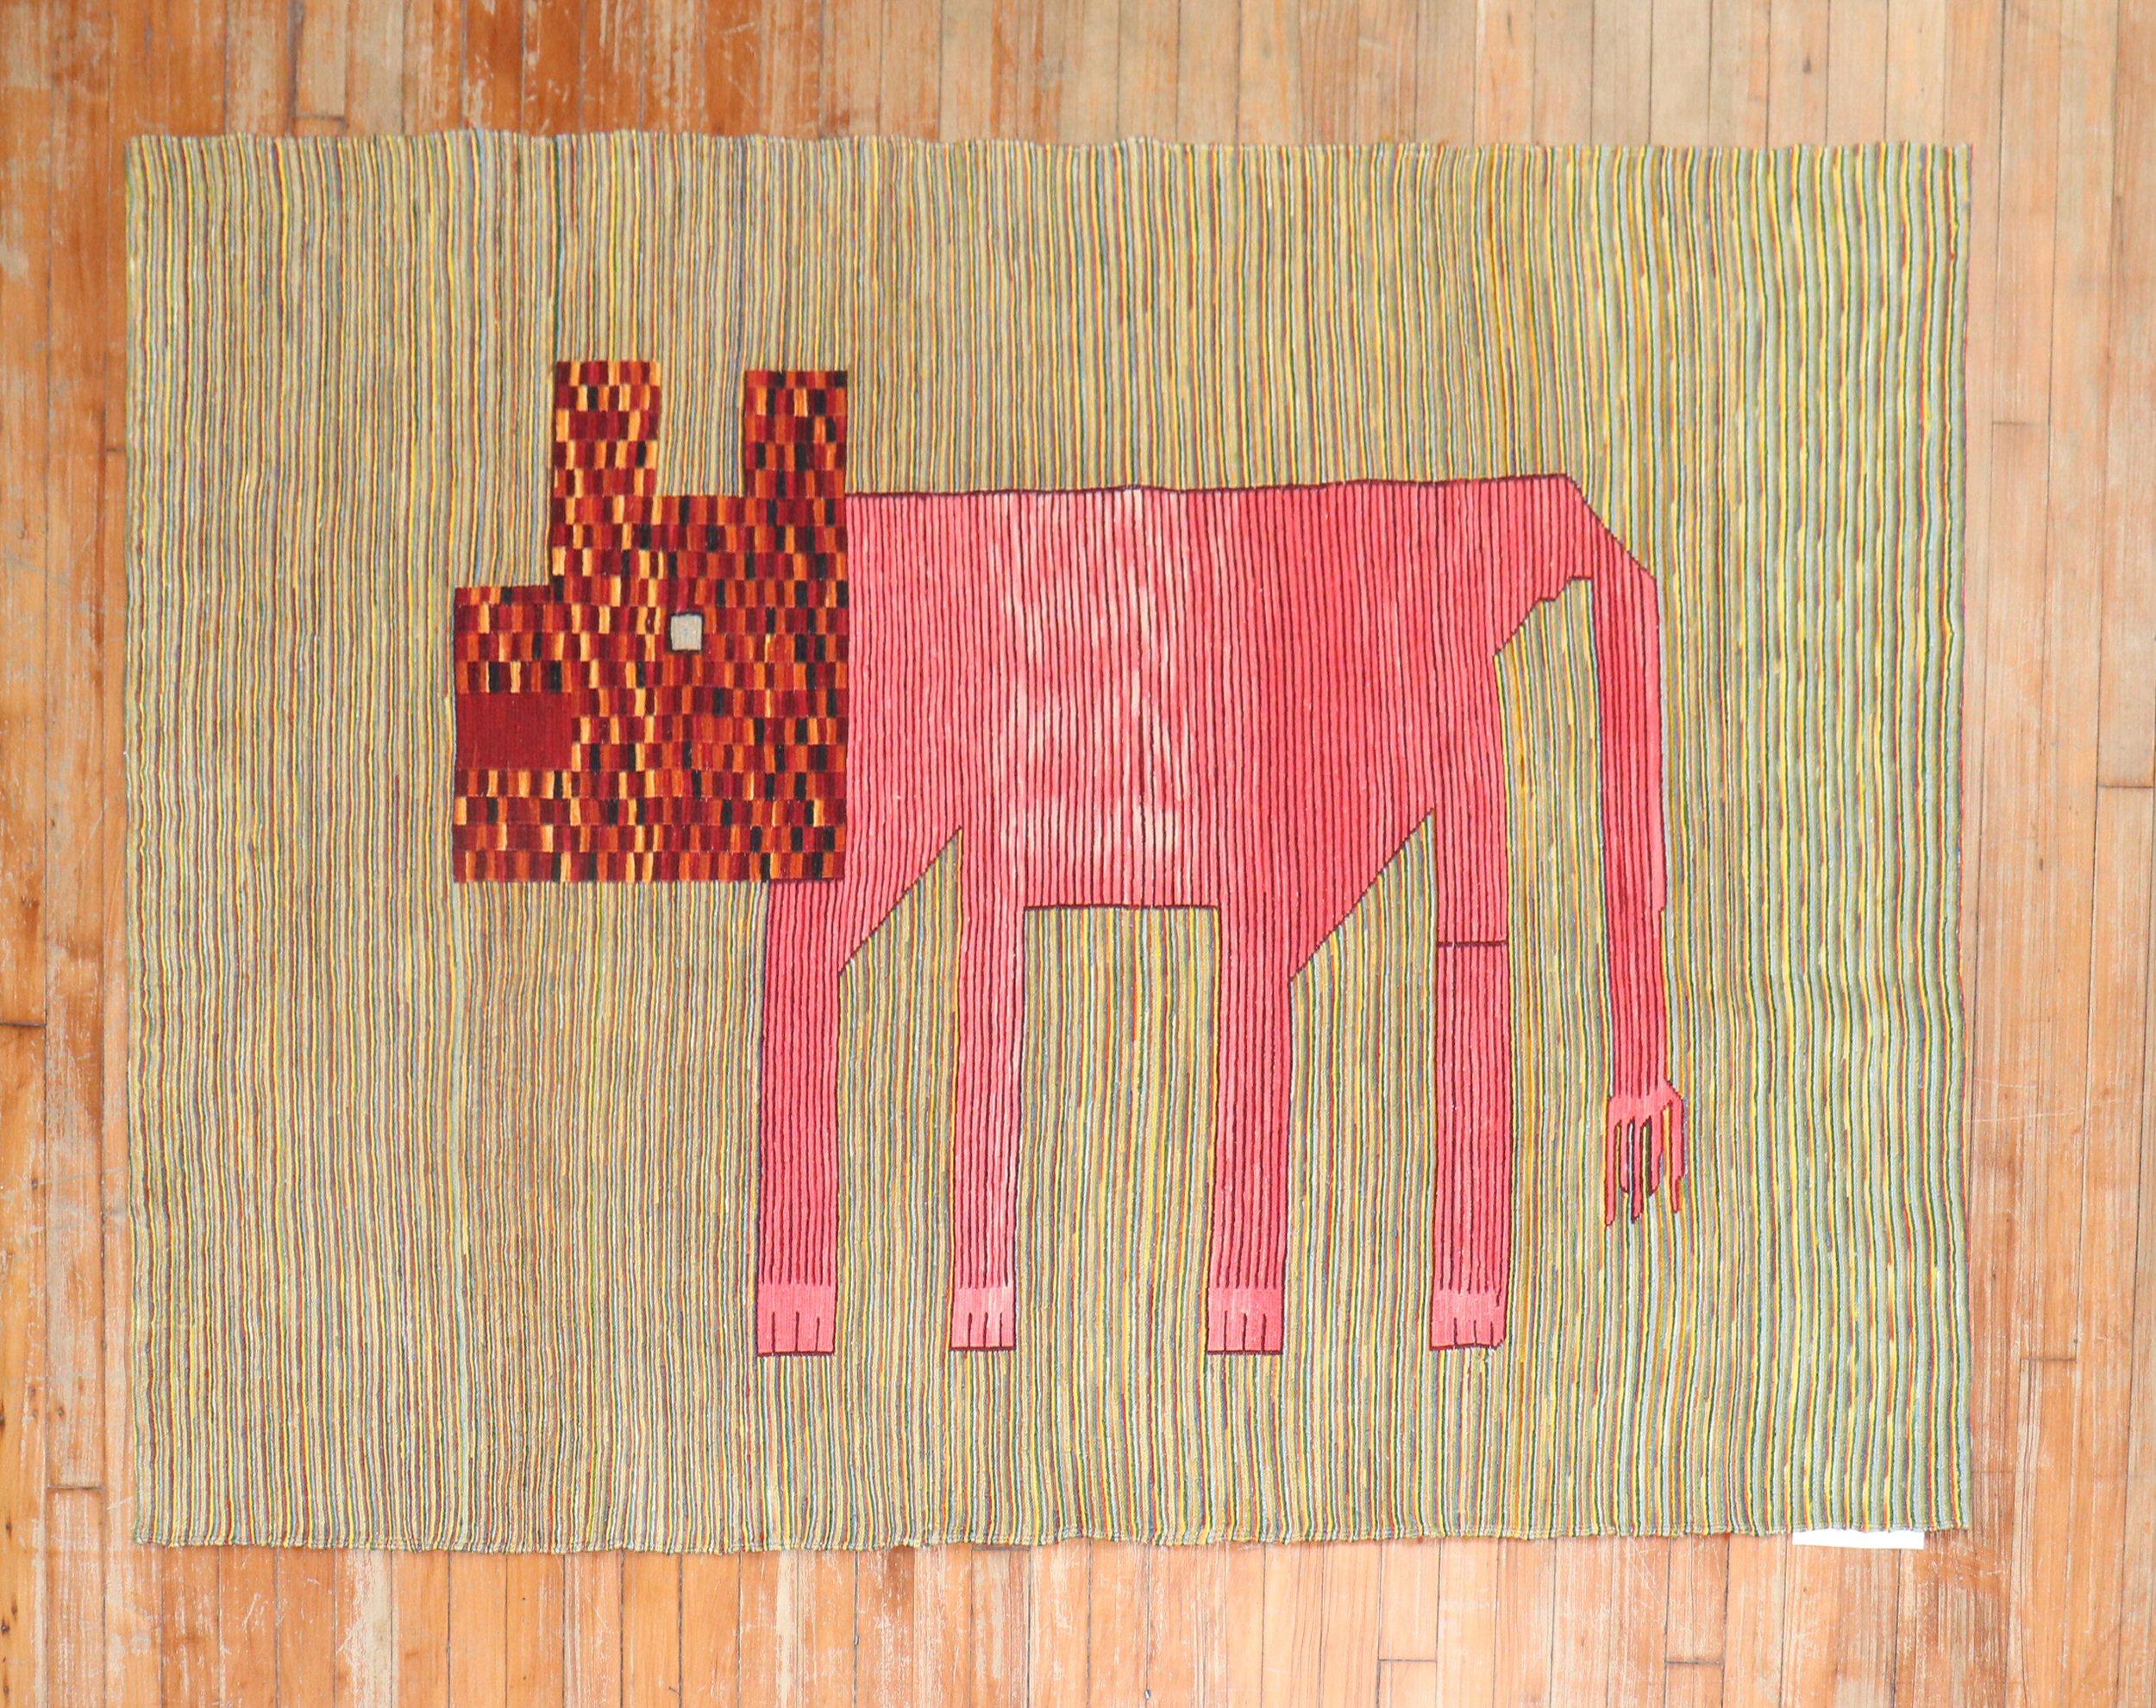 Accent size Persian kilim from the late 20th century with a Pink Dog on a colorful striped field

Measures: 4'3'' x 511''.

This was originally belonging to a private Persian collector who requested to make a custom collection of flat-weaves